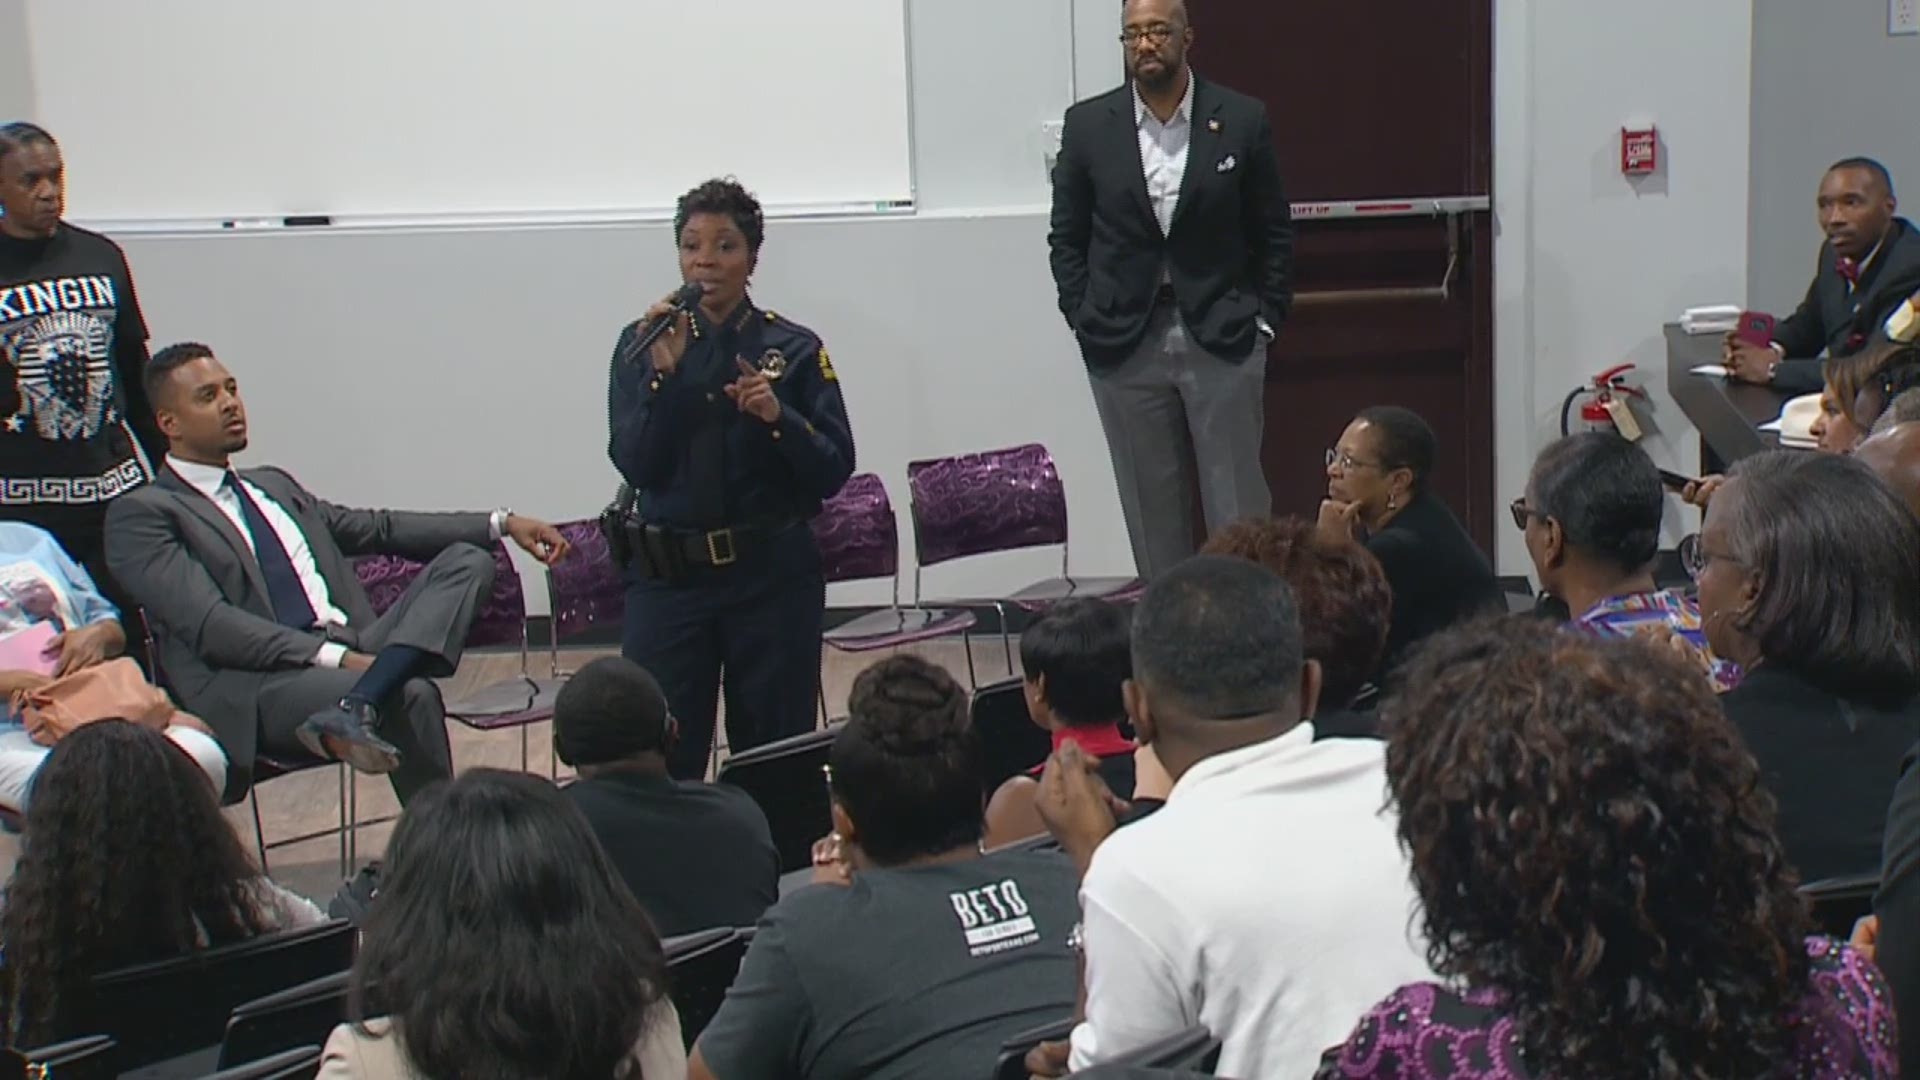 At forum, Dallas chief explains why she has not fired Guyger yet